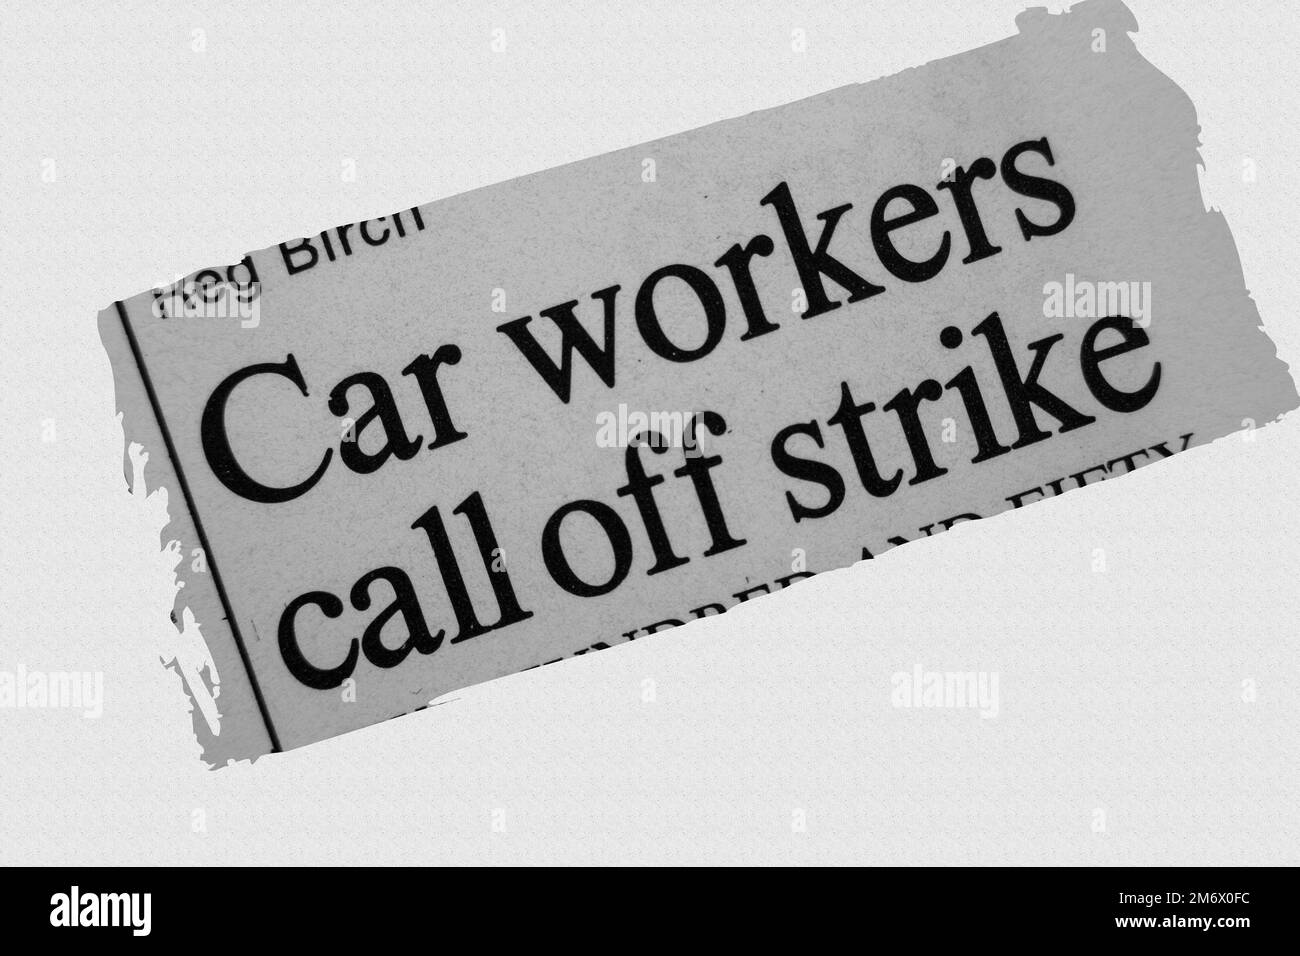 Car workers call off strike - news story from 1975 newspaper headline article title with overlay Stock Photo